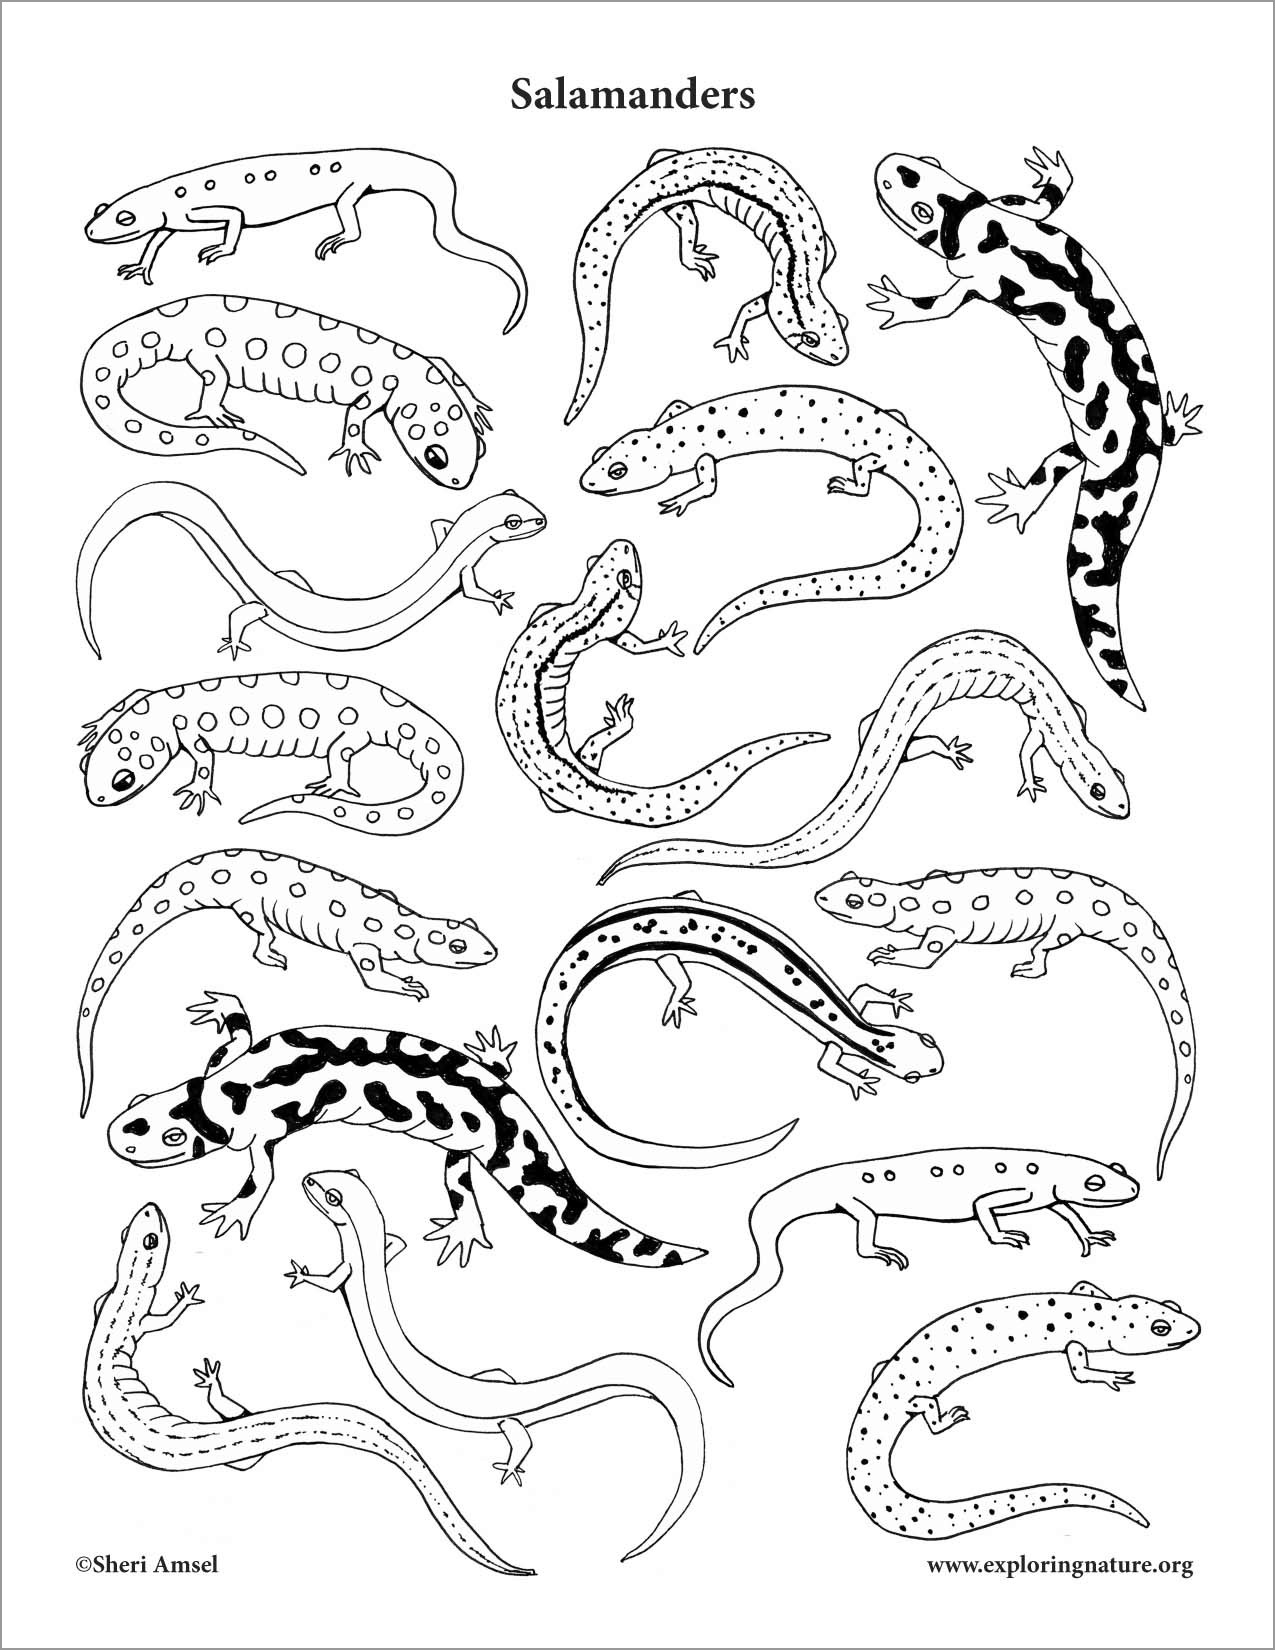 All Kind Of Salamander Coloring Page for Kids